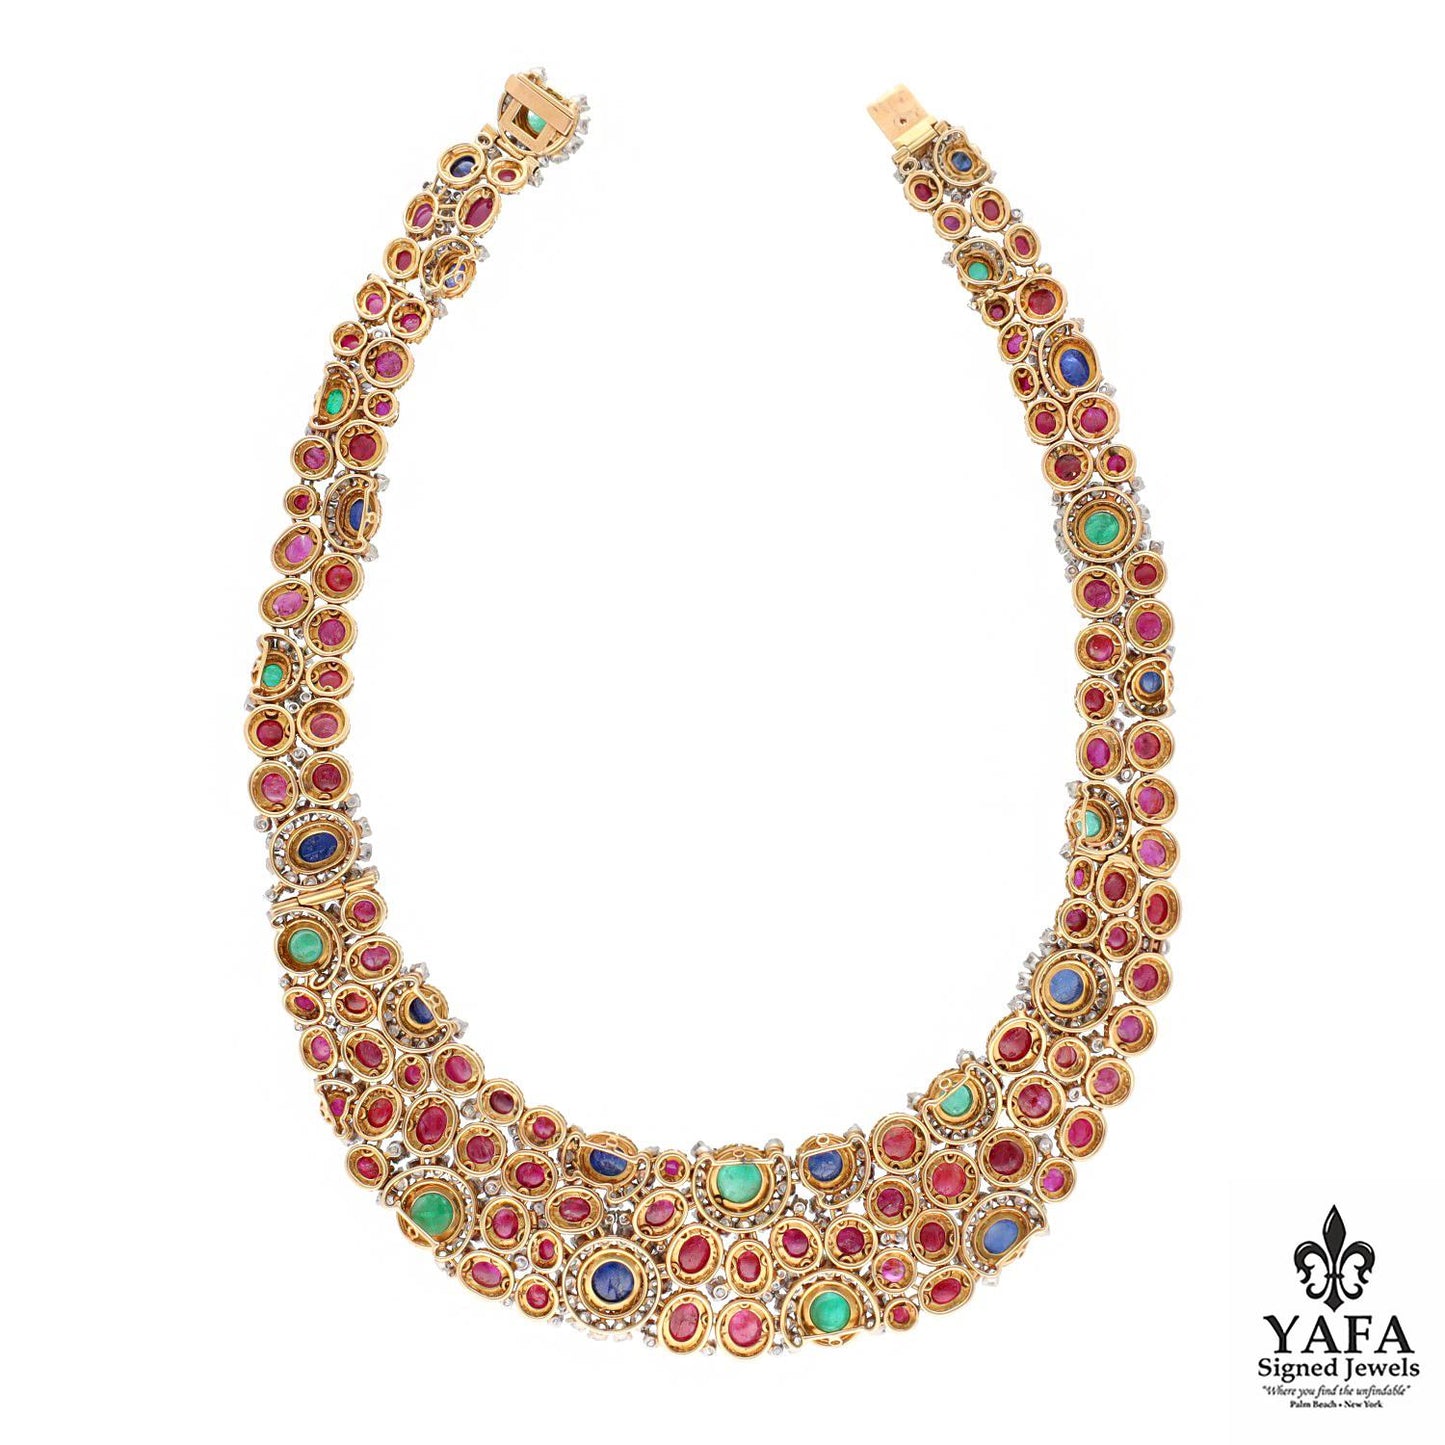 Van Cleef & Arpels Cabochon Ruby, Emerald, Sapphire and Diamond Necklace